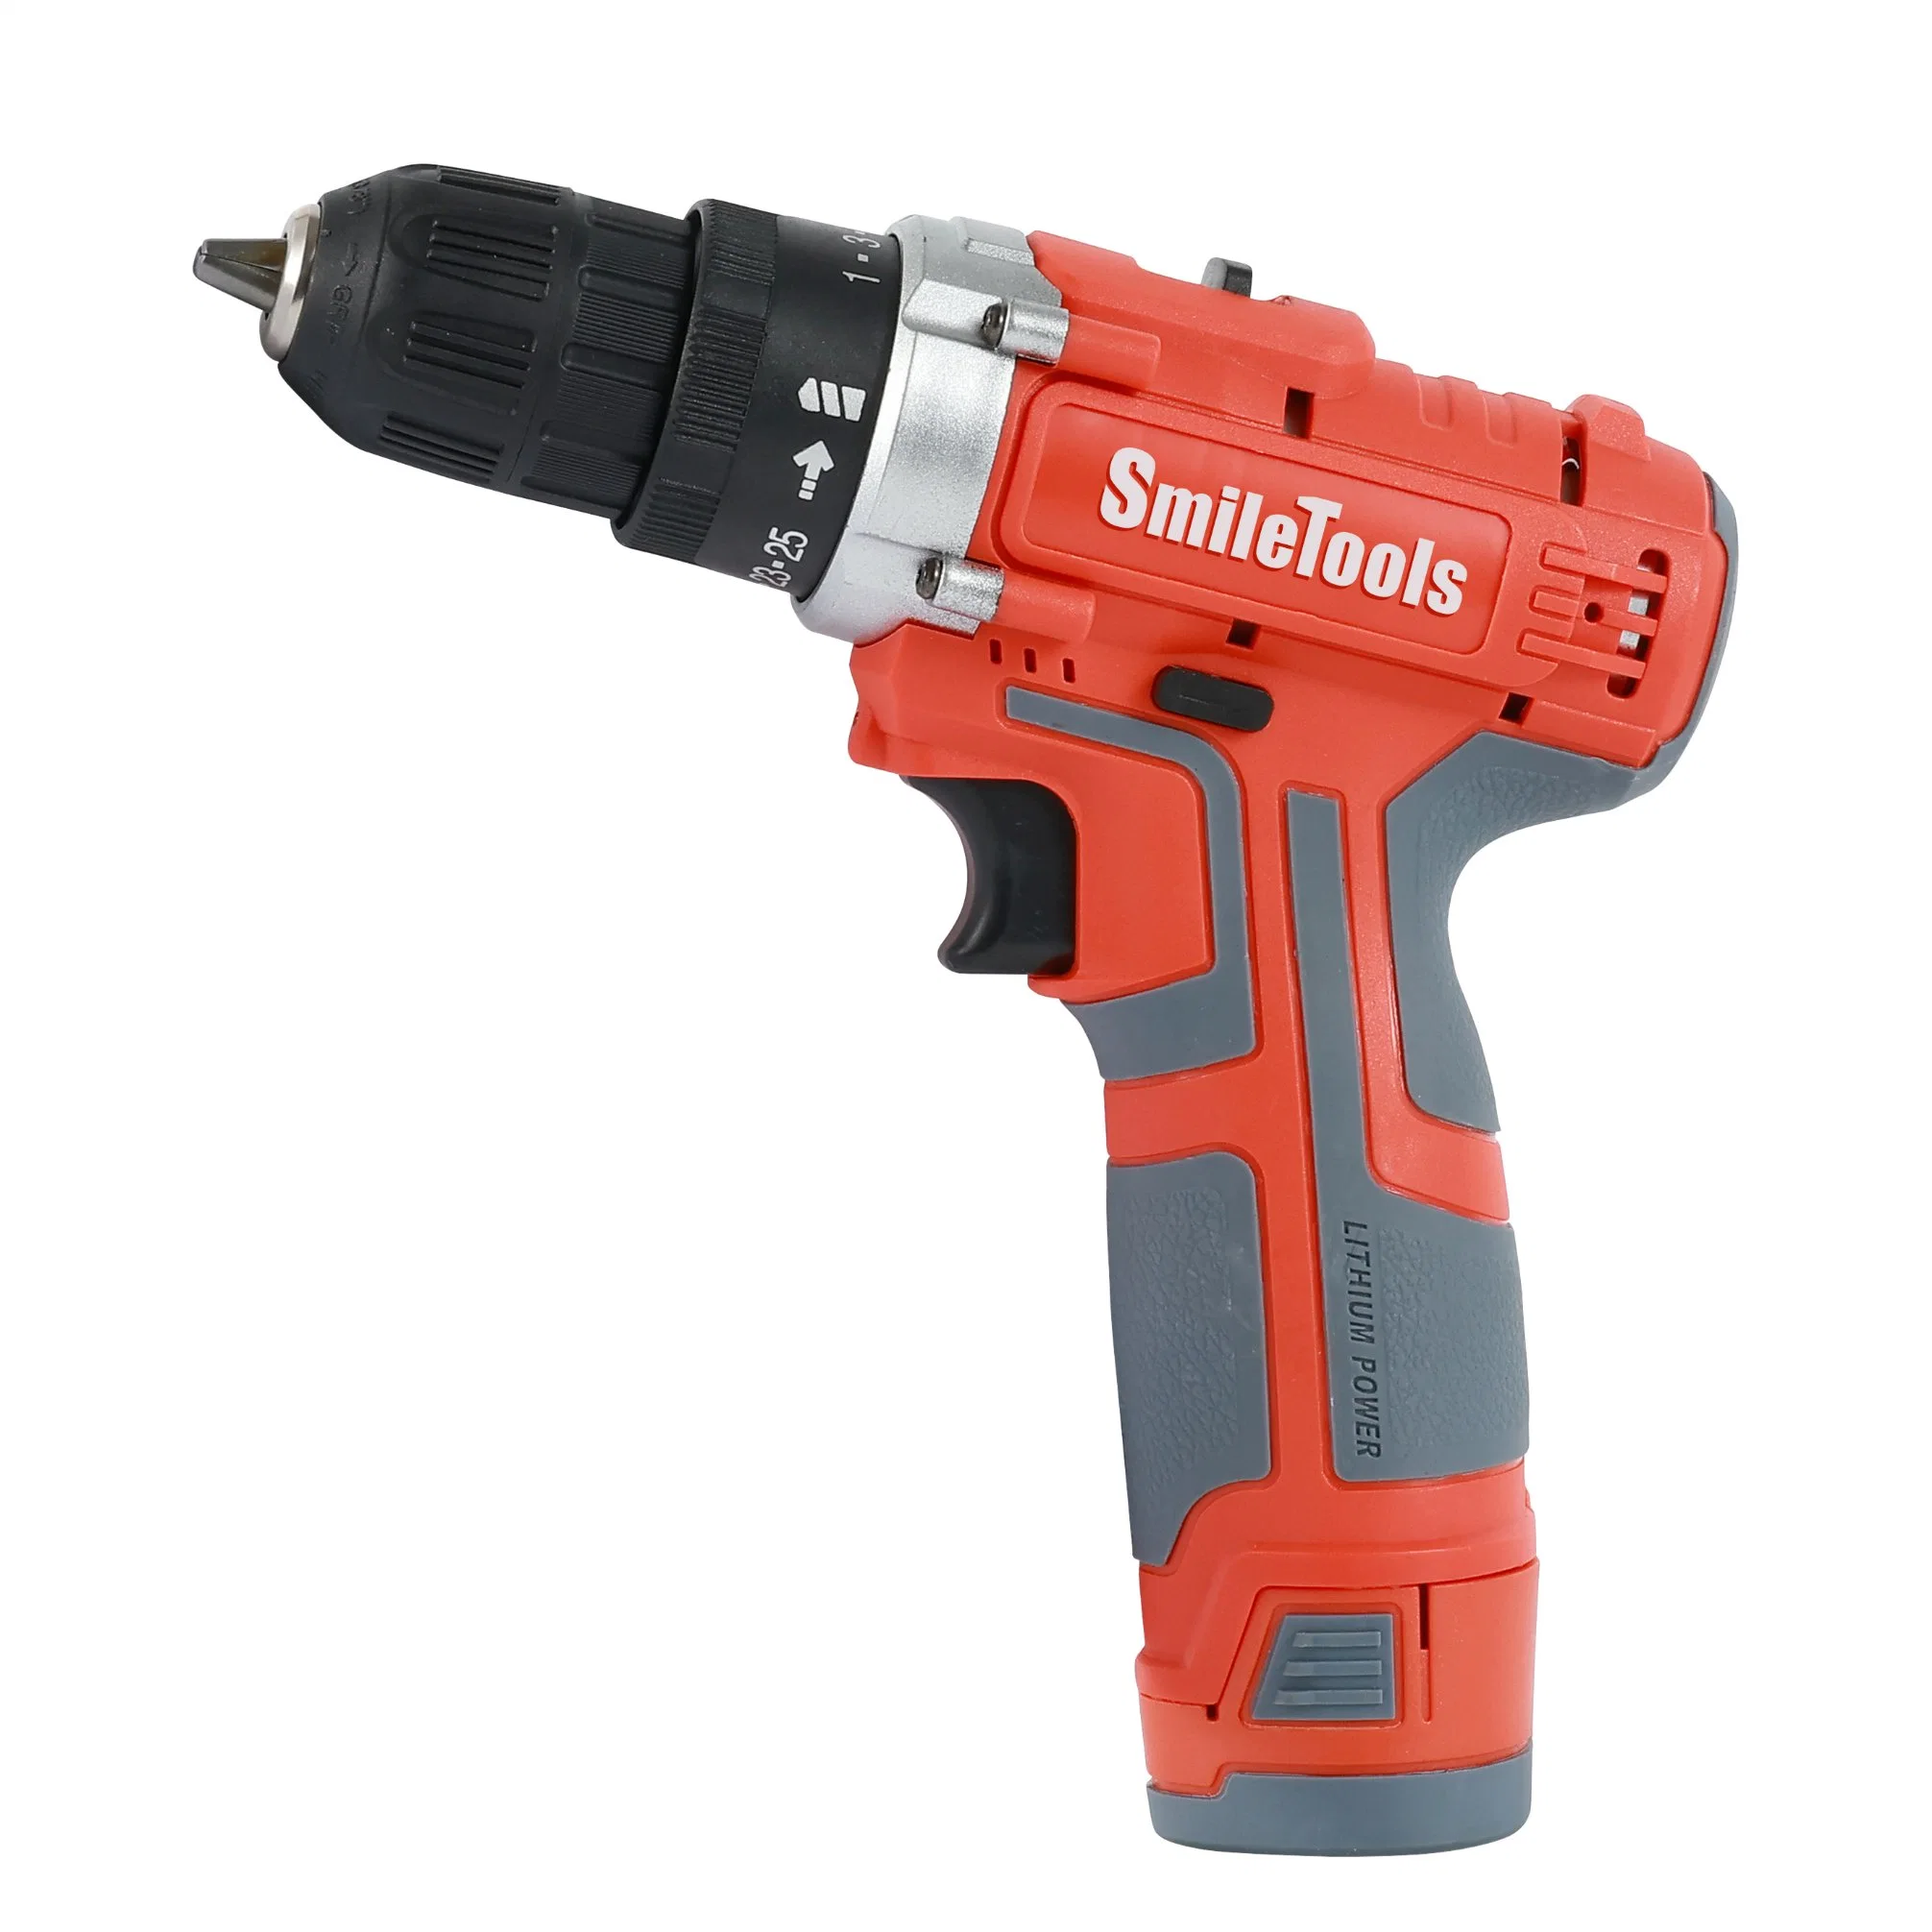 Wholesale Custom Home DIY Electric Tool 12V Impact Drills Wireless Screwdriver Lithium Lion Battery Cordless Drill Set